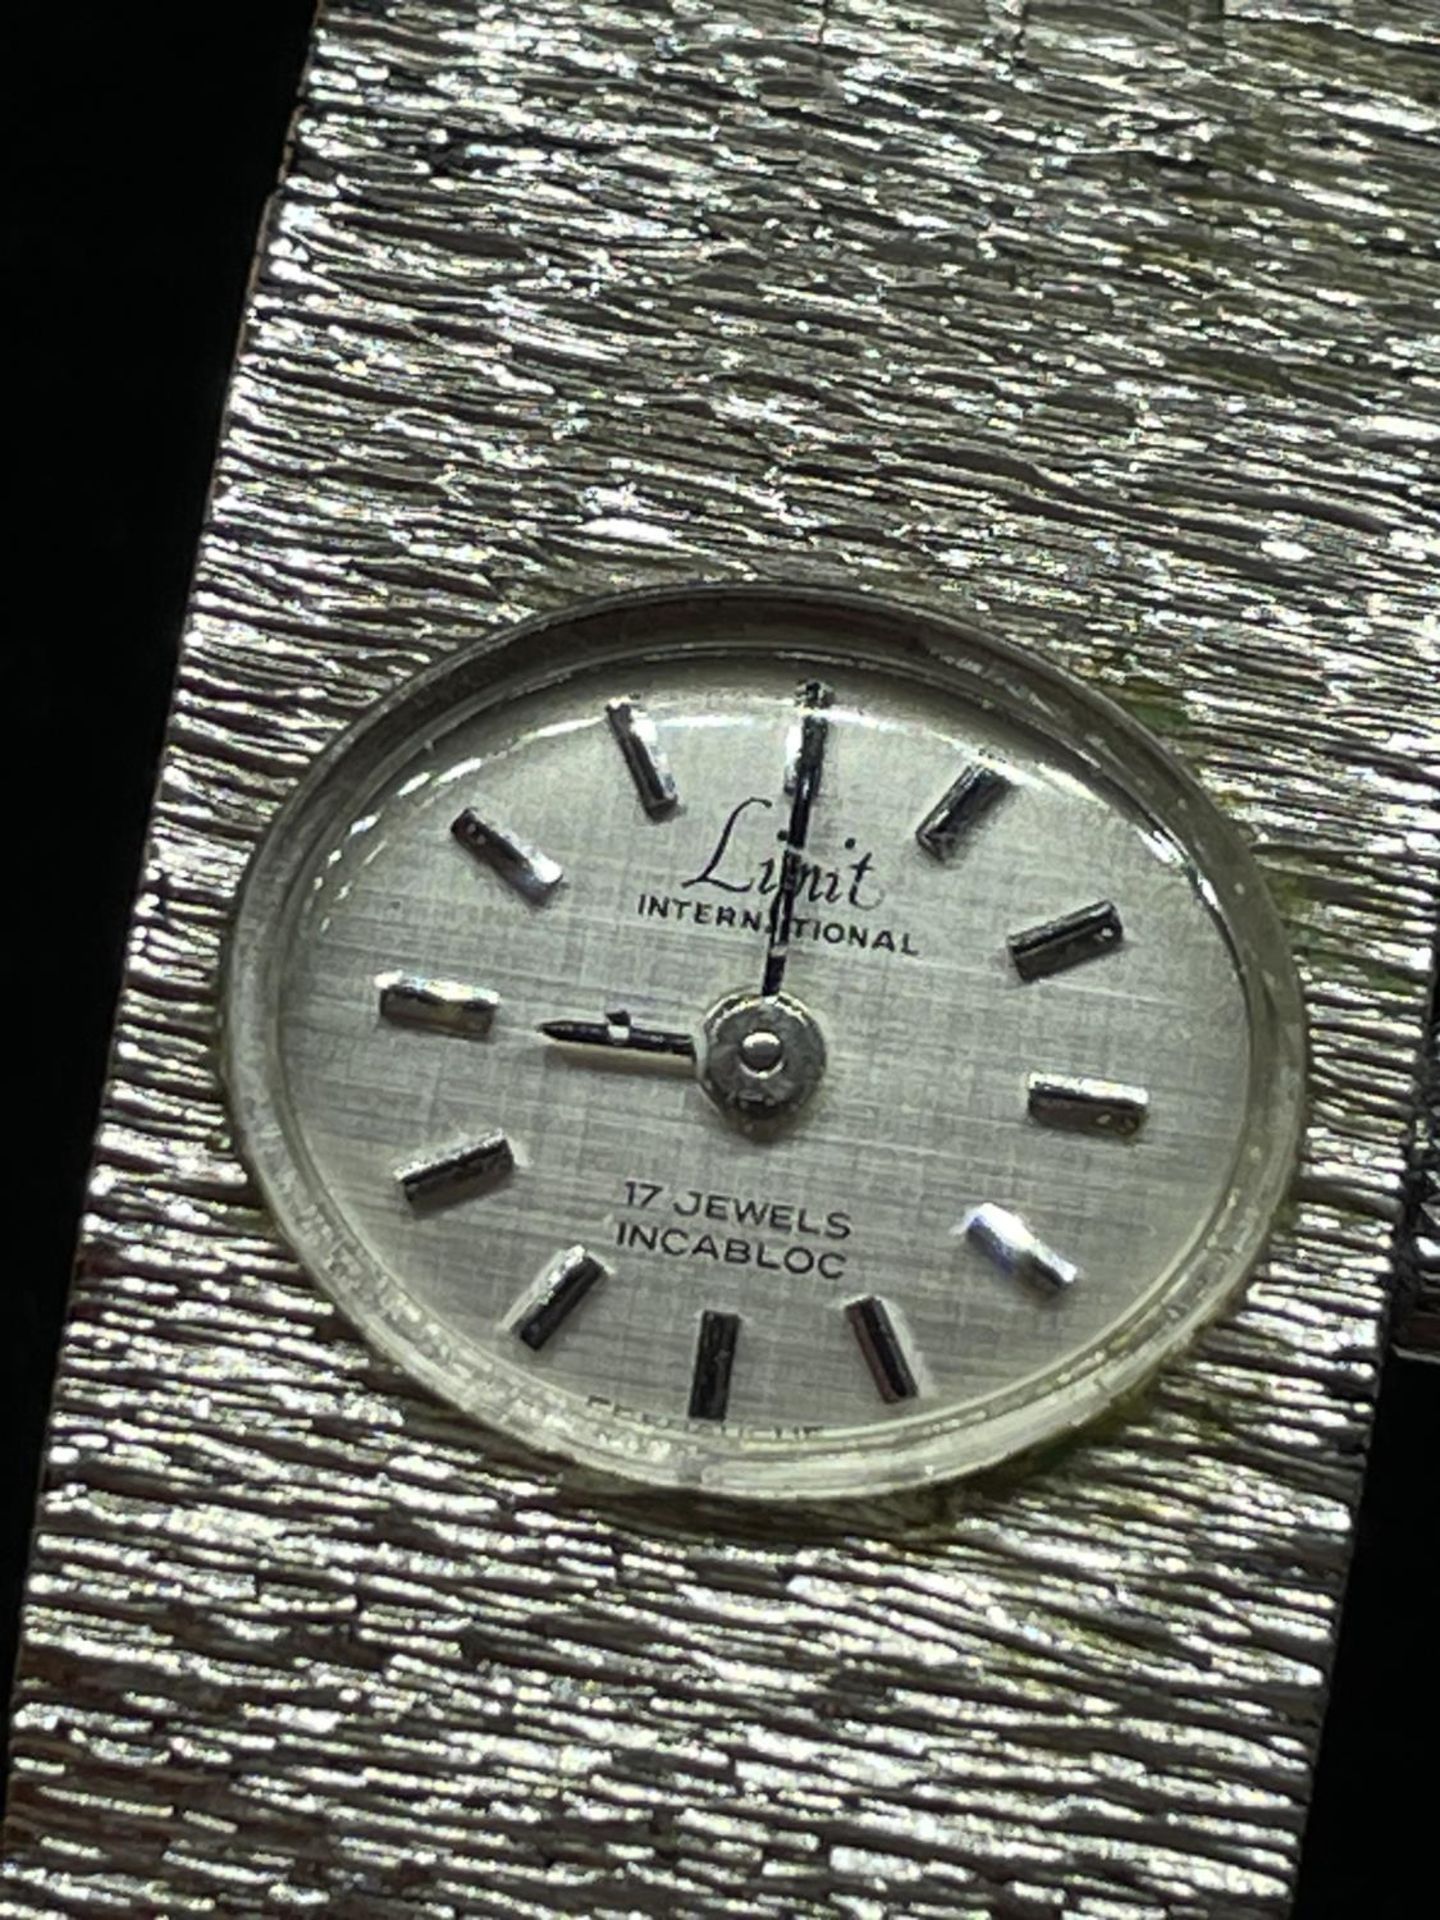 A LIMIT WRIST WATCH IN A PRESENTATION BOX SEEN WORKING BUT NO WARRANTY - Image 2 of 2